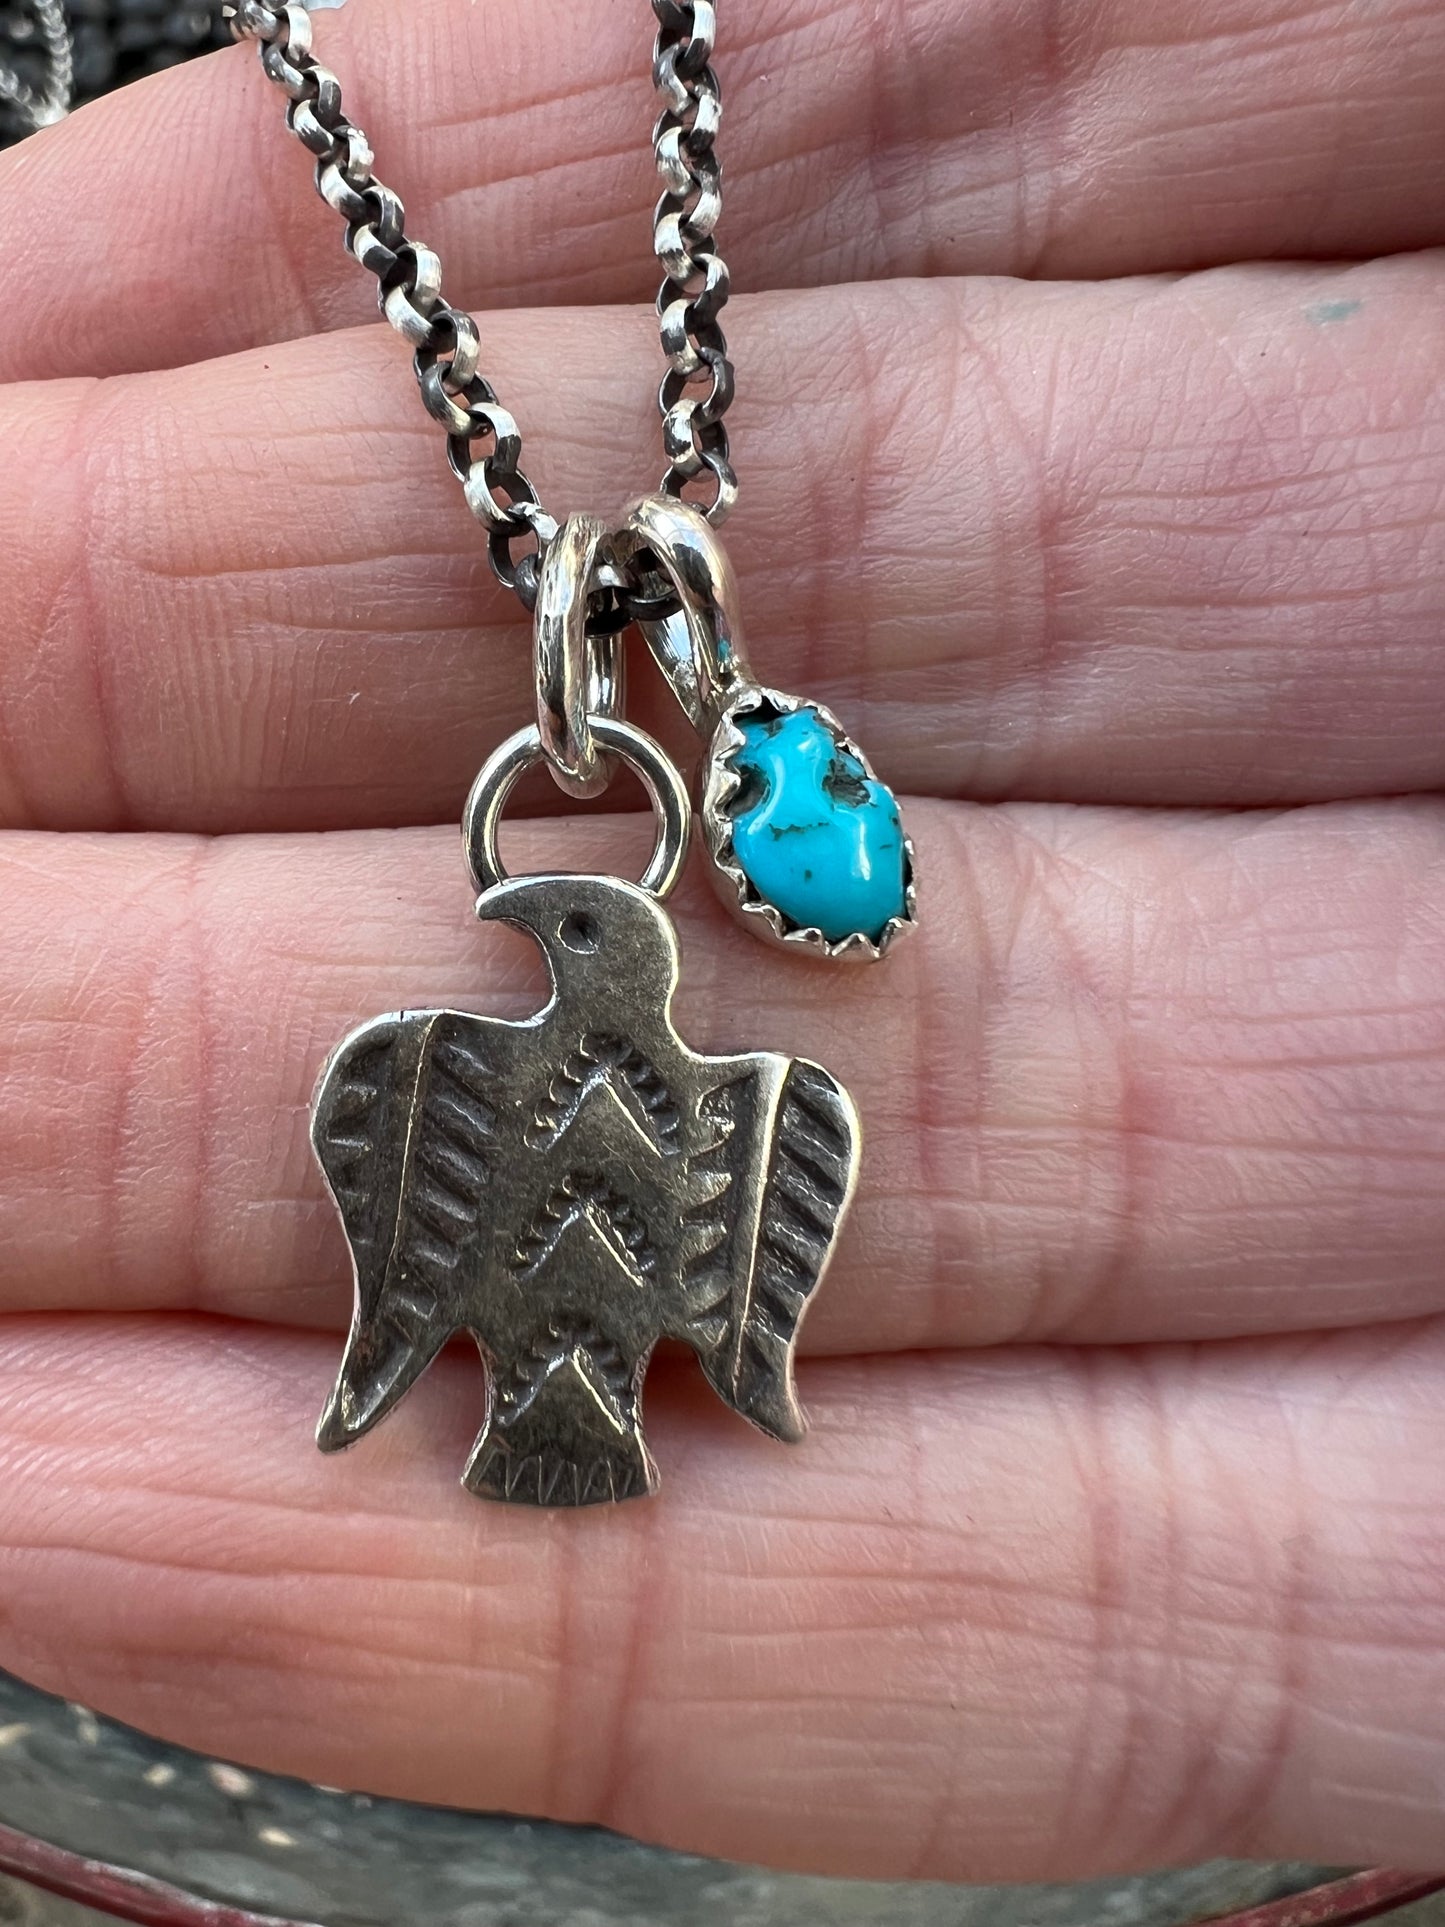 Turquoise Handstamped Charm Necklace